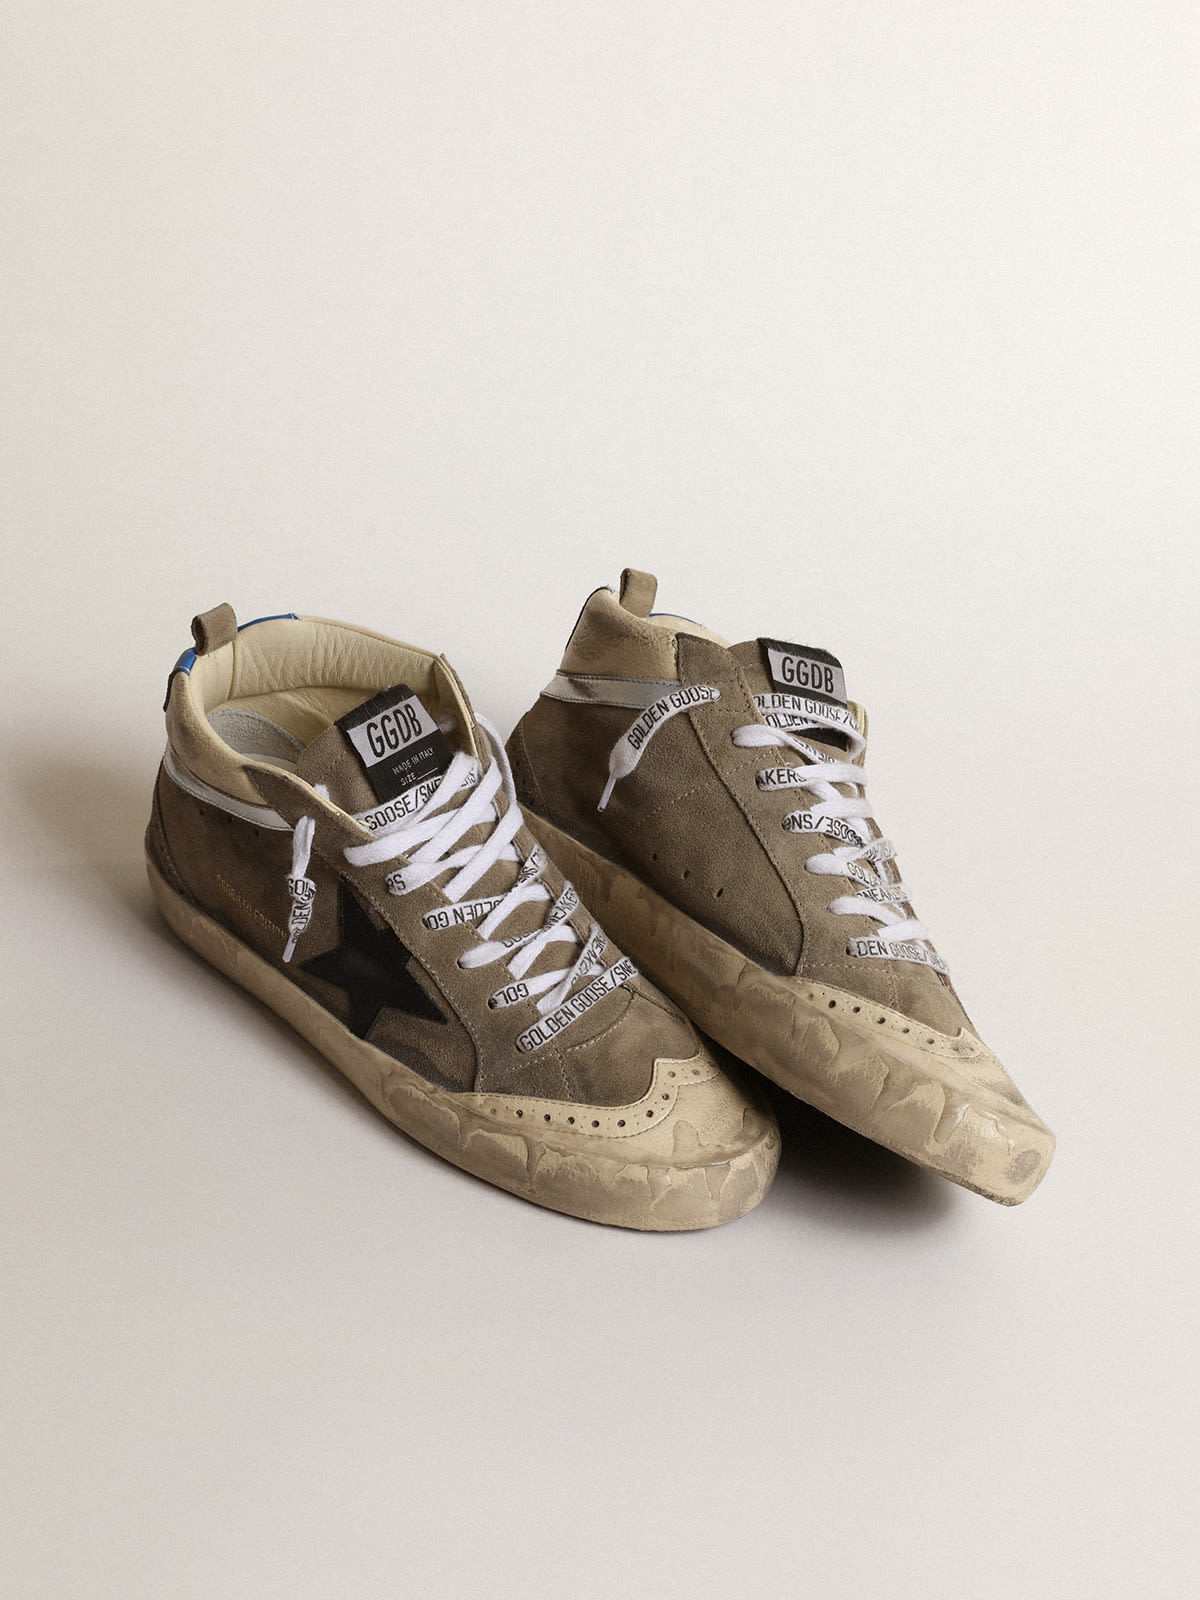 Golden Goose - Women’s Mid Star LAB in gray suede with black star in 